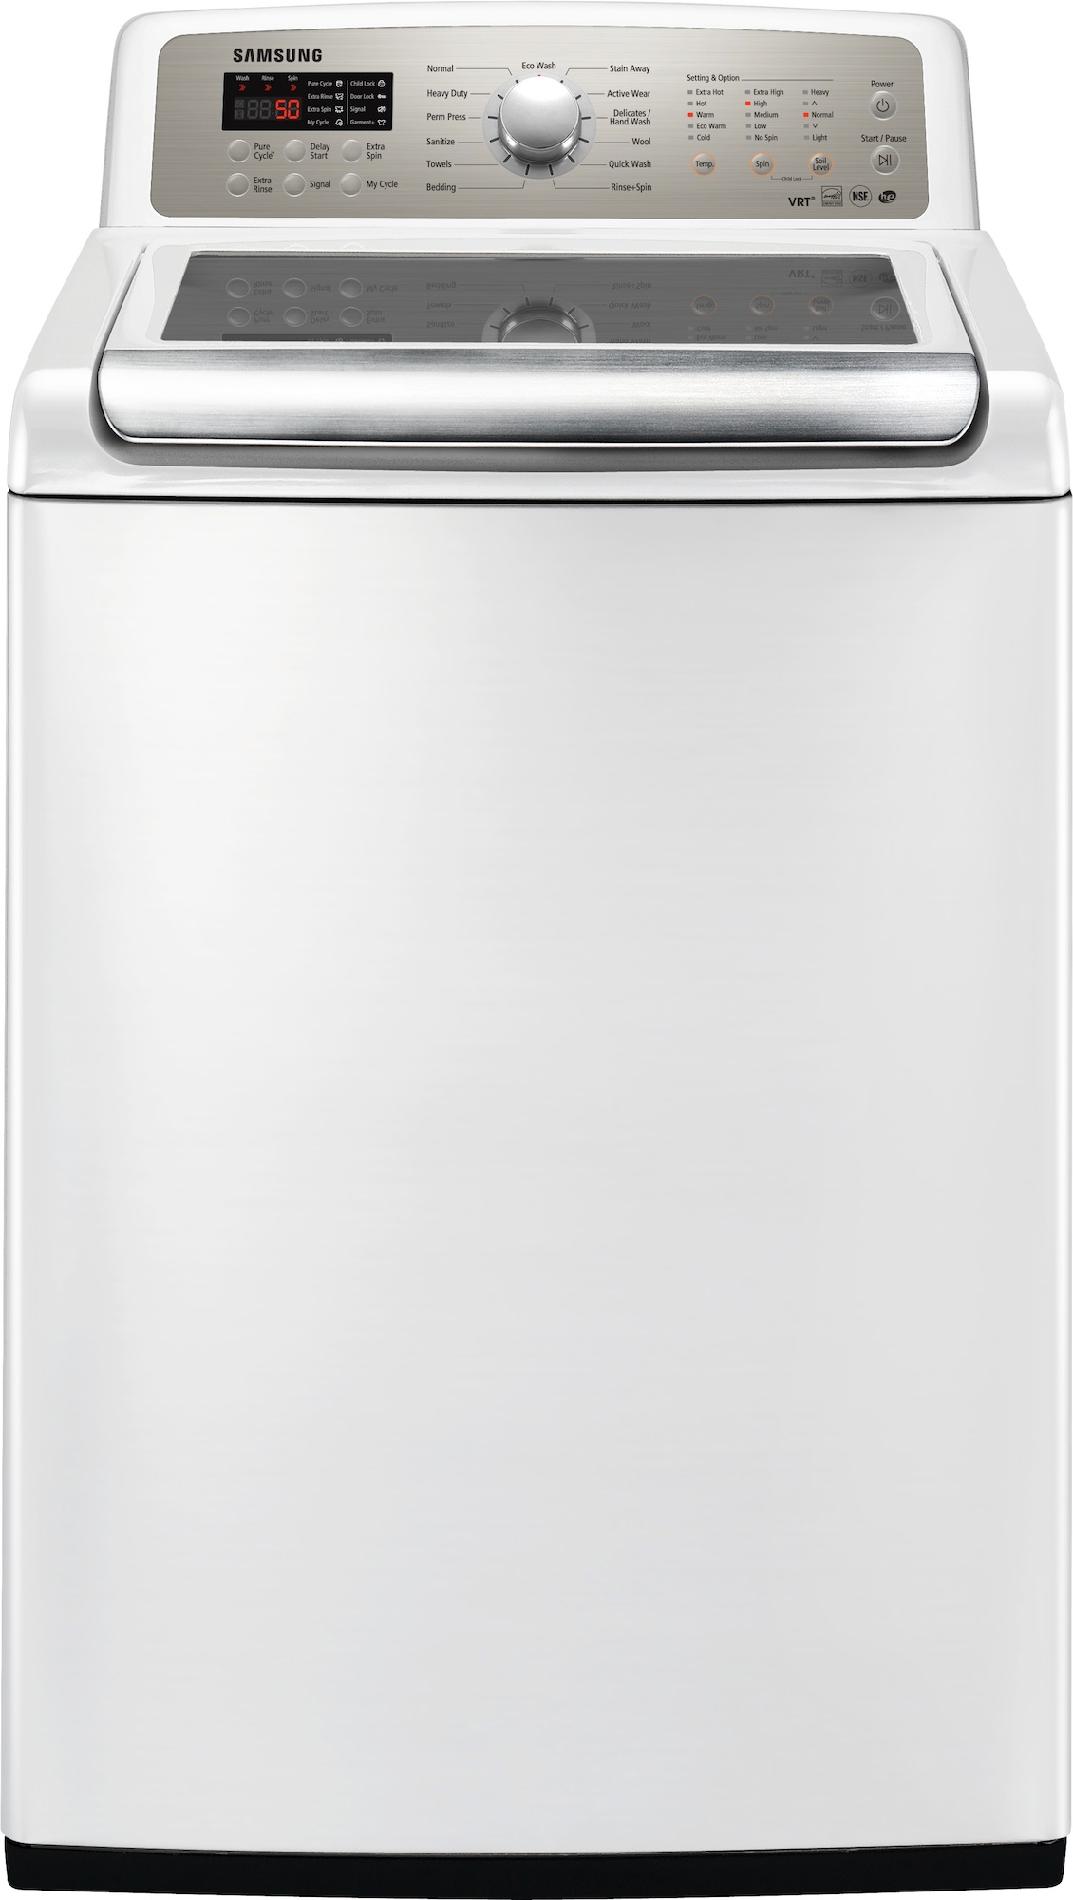 Samsung 4.7 cu. ft. High-Efficiency Top-Load Washer - White